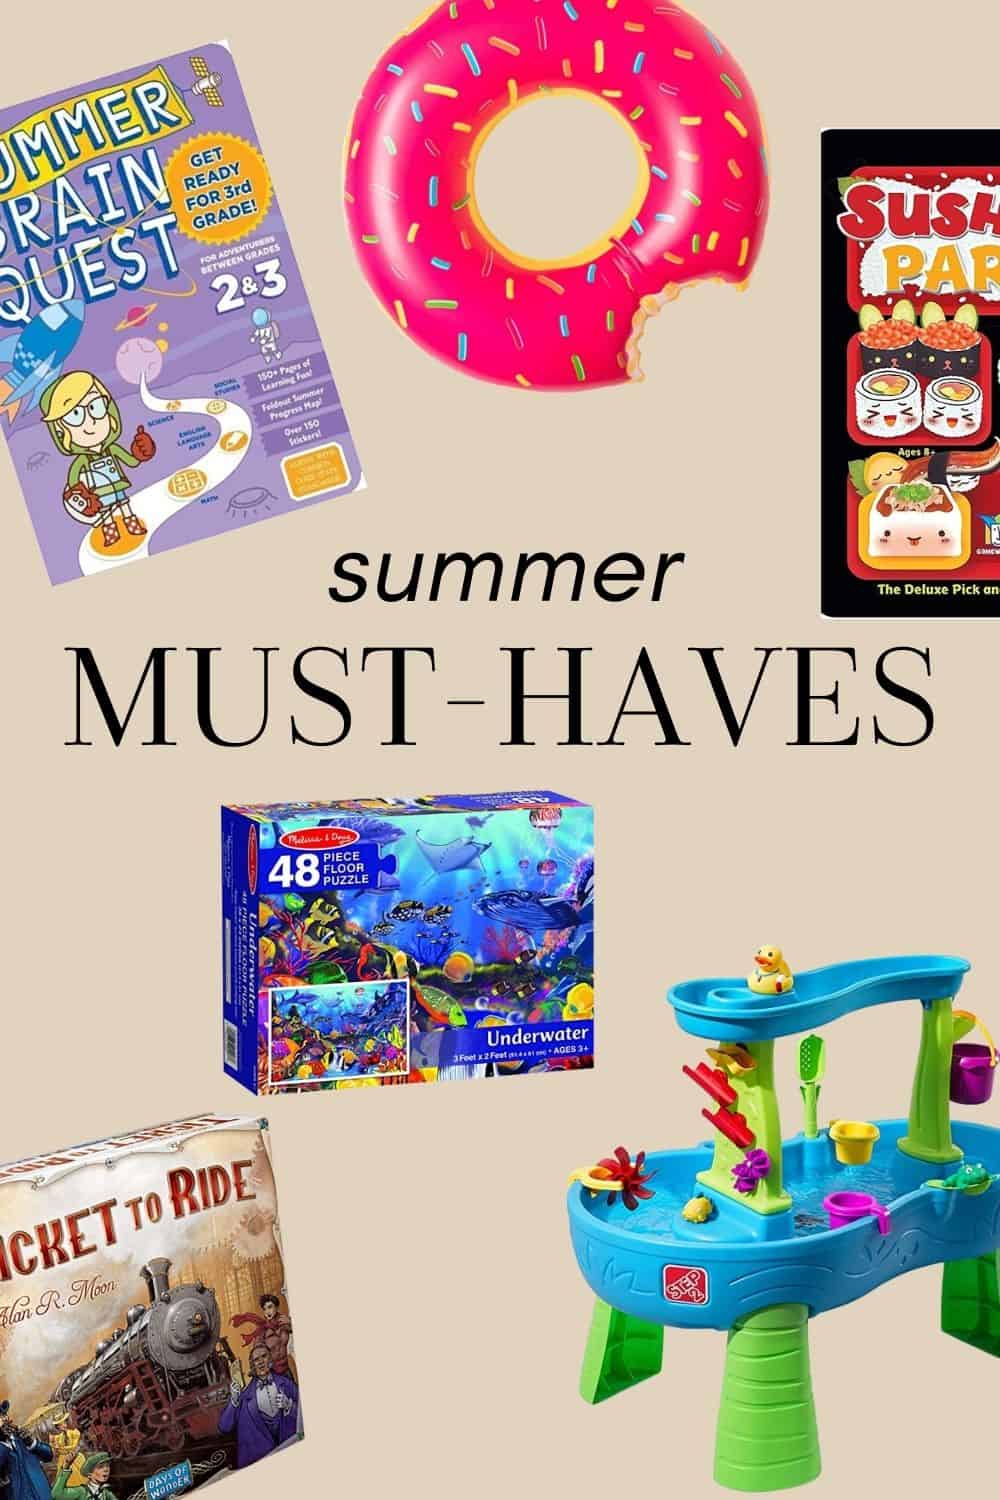 collage of summer activities and toys with text overlay that says 